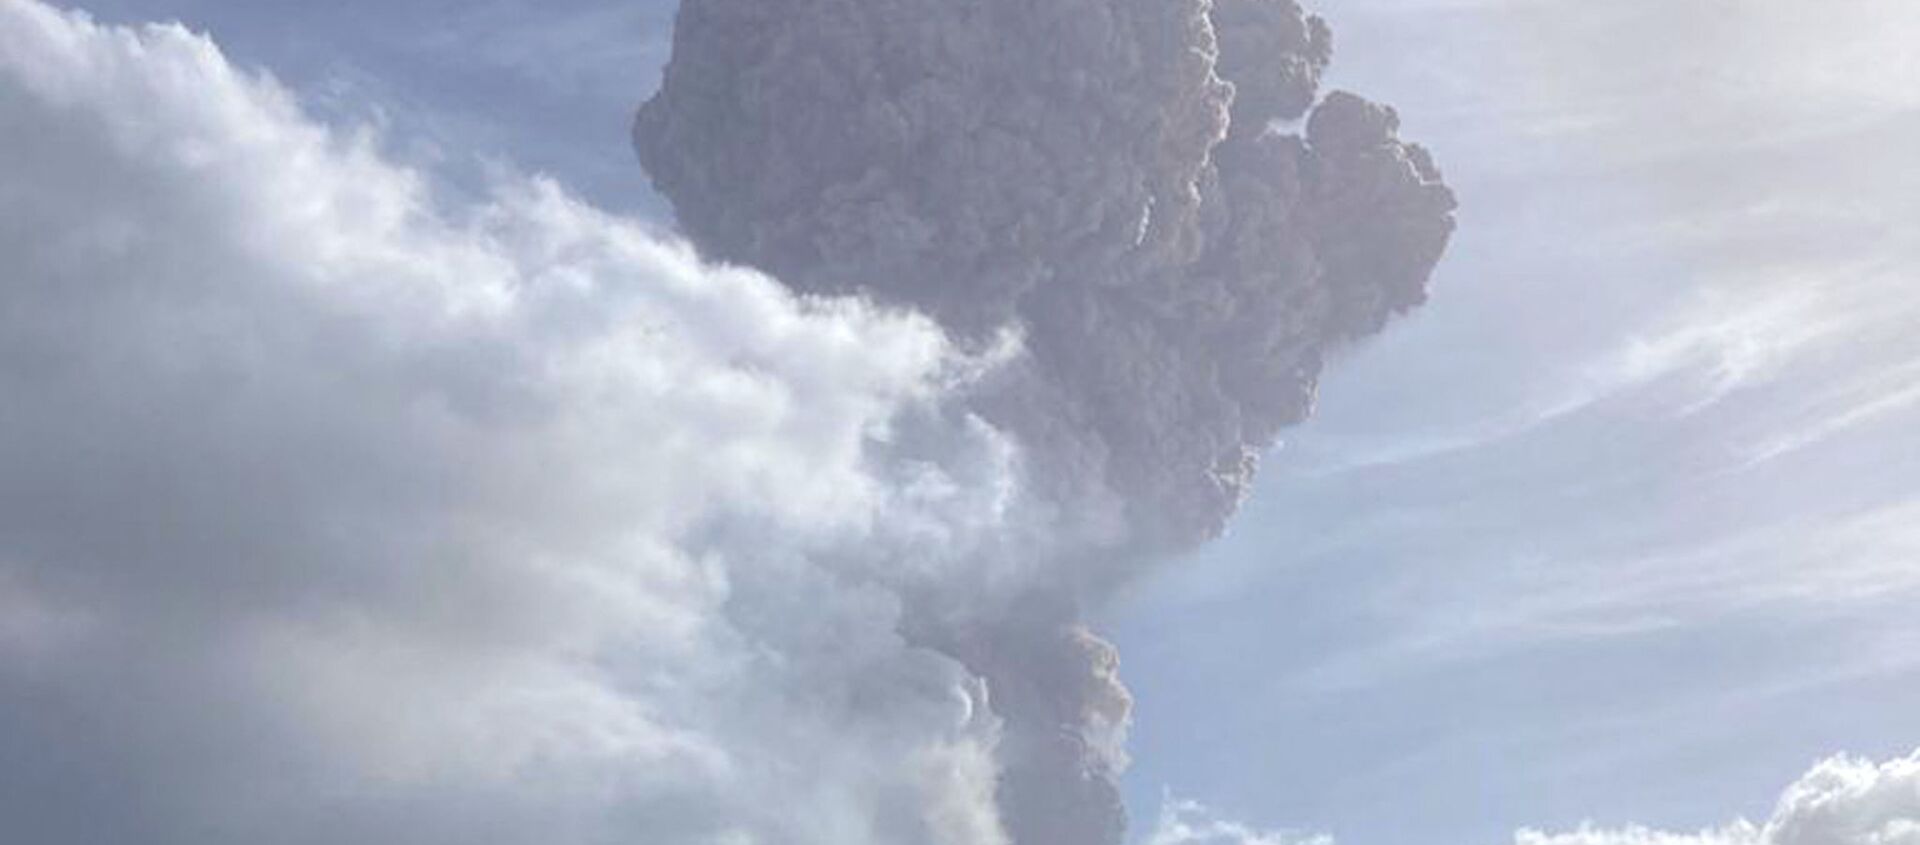 This April 9, 2021, image courtesy of The University of the West Indies (UWI) Seismic Research Centre shows the eruption of La Soufriere Volcano in Saint Vincent. - La Soufriere erupted Friday for the first time in 40 years on the Caribbean island of Saint Vincent, prompting thousands of people to evacuate, seismologists said. The blast from the volcano, sent plumes of ash 20,000 feet (6,000 meters) into the air, the local emergency management agency said. The eruption was confirmed by the UWI center - Sputnik International, 1920, 09.04.2021